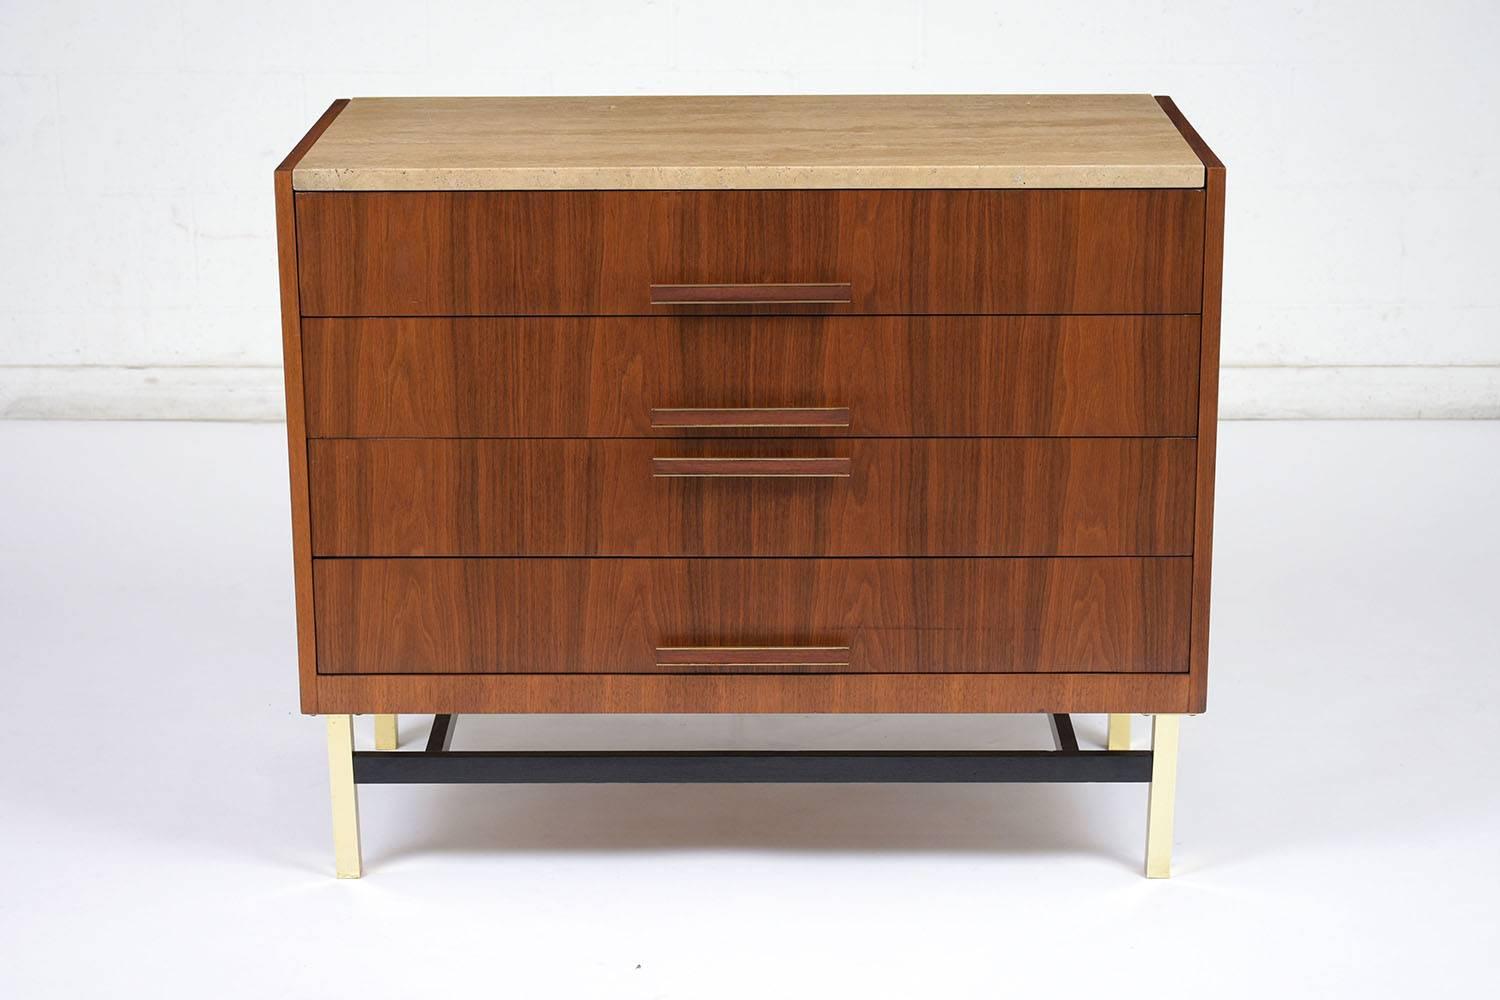 This 1960s chest of drawers is made by Heritage in the style of Paul McCobb. There are four drawers for ample storage with wood and brass drawer pulls. The walnut stained chest has a travertine slab insert on top. The brass legs are made sturdy by